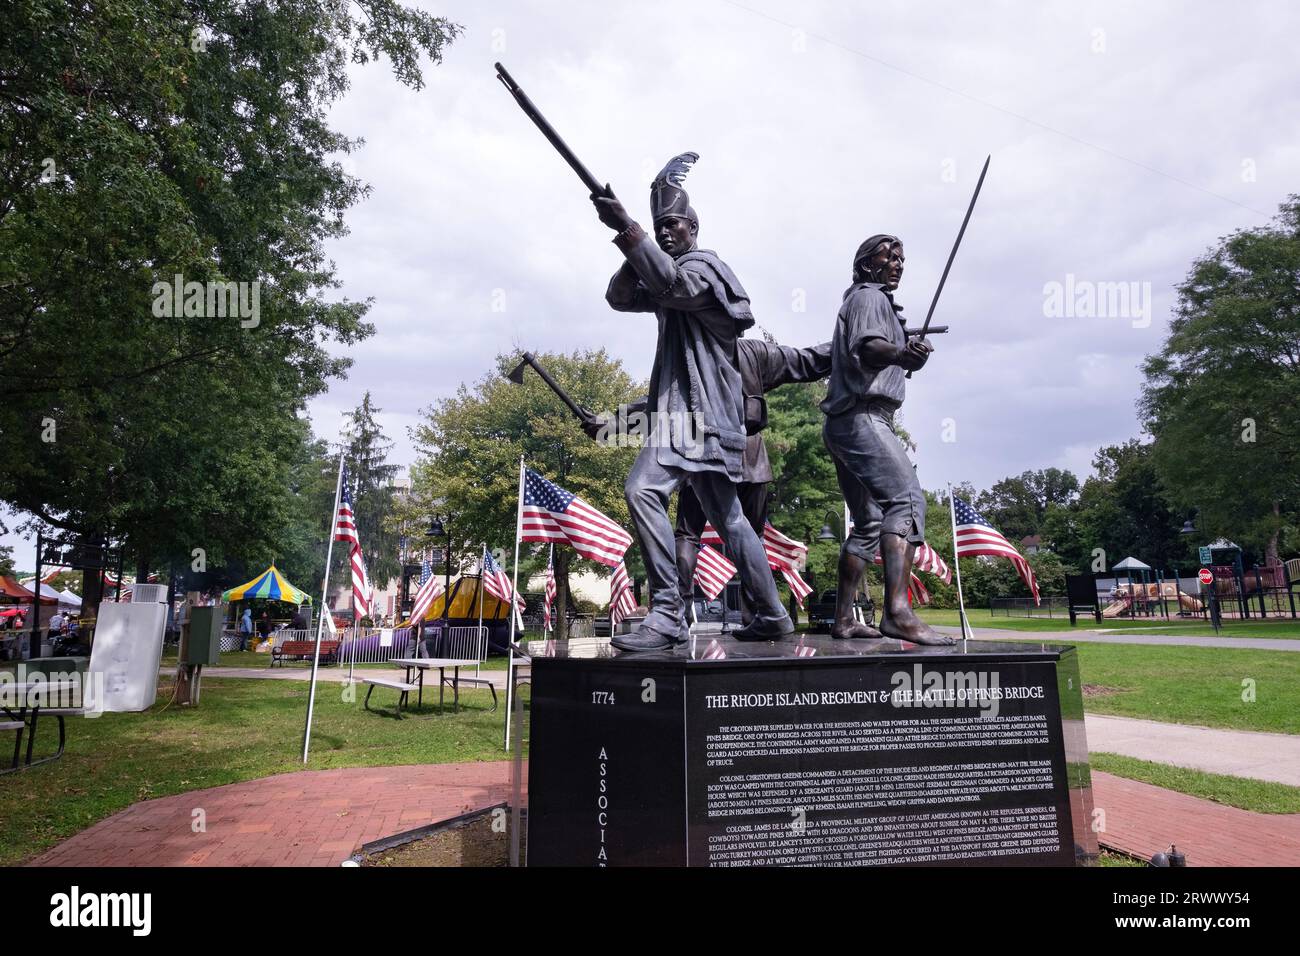 A monument to the diverse group of fighter who fought the battle of Pines Bridge. The unit contained Whites, Blacks and Indigenous fighters, a first. Stock Photo